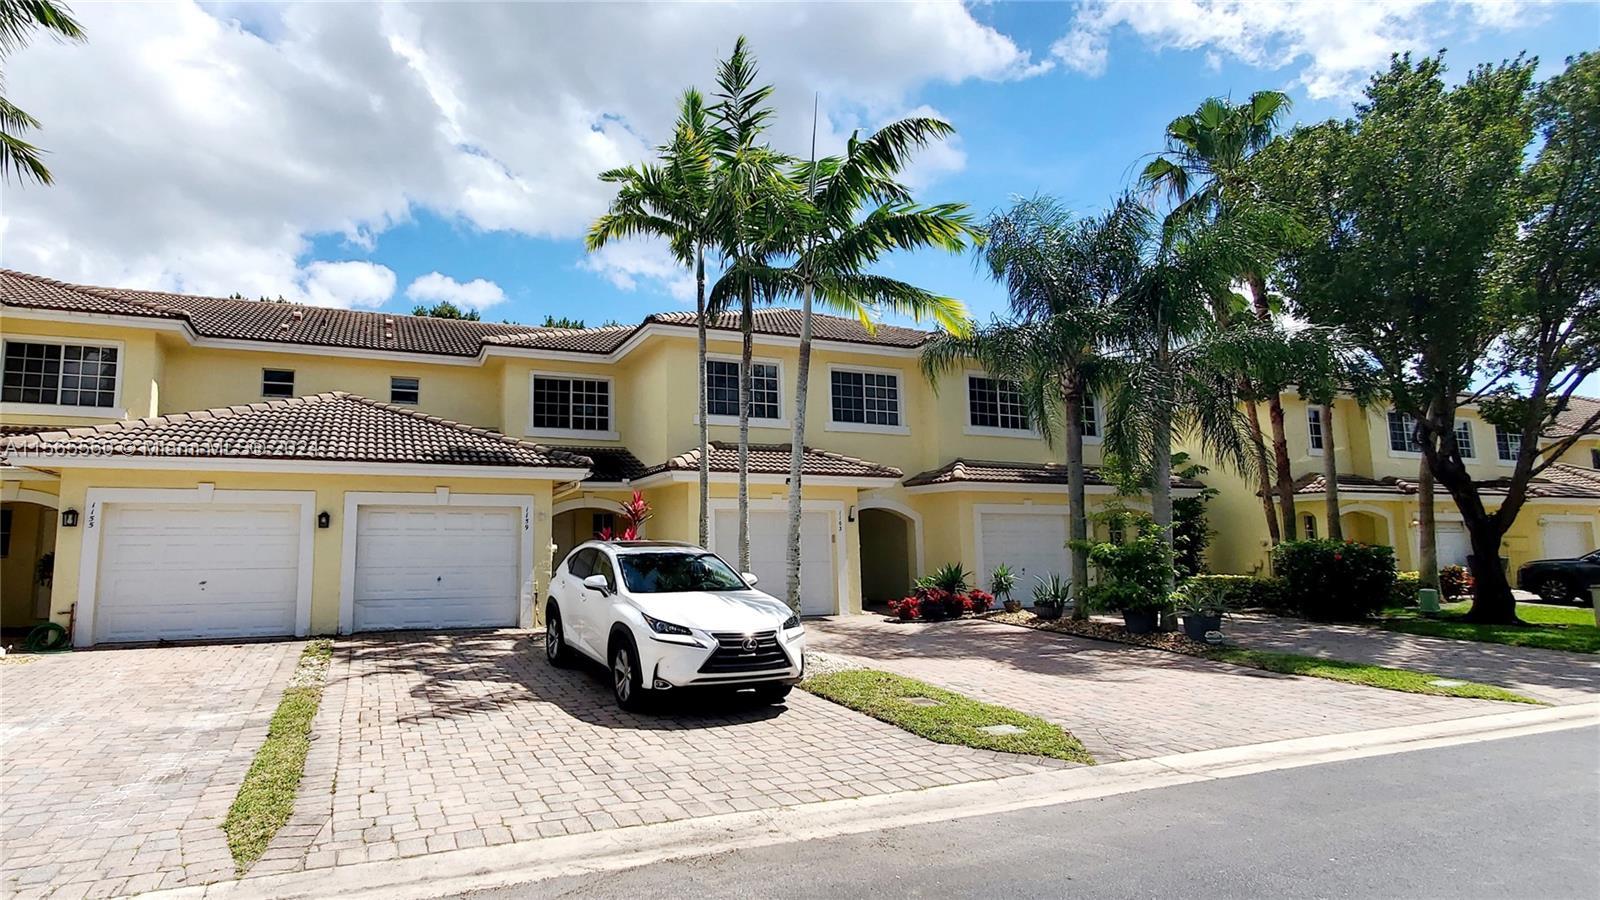 Photo of 1159 Imperial Lake Rd in West Palm Beach, FL